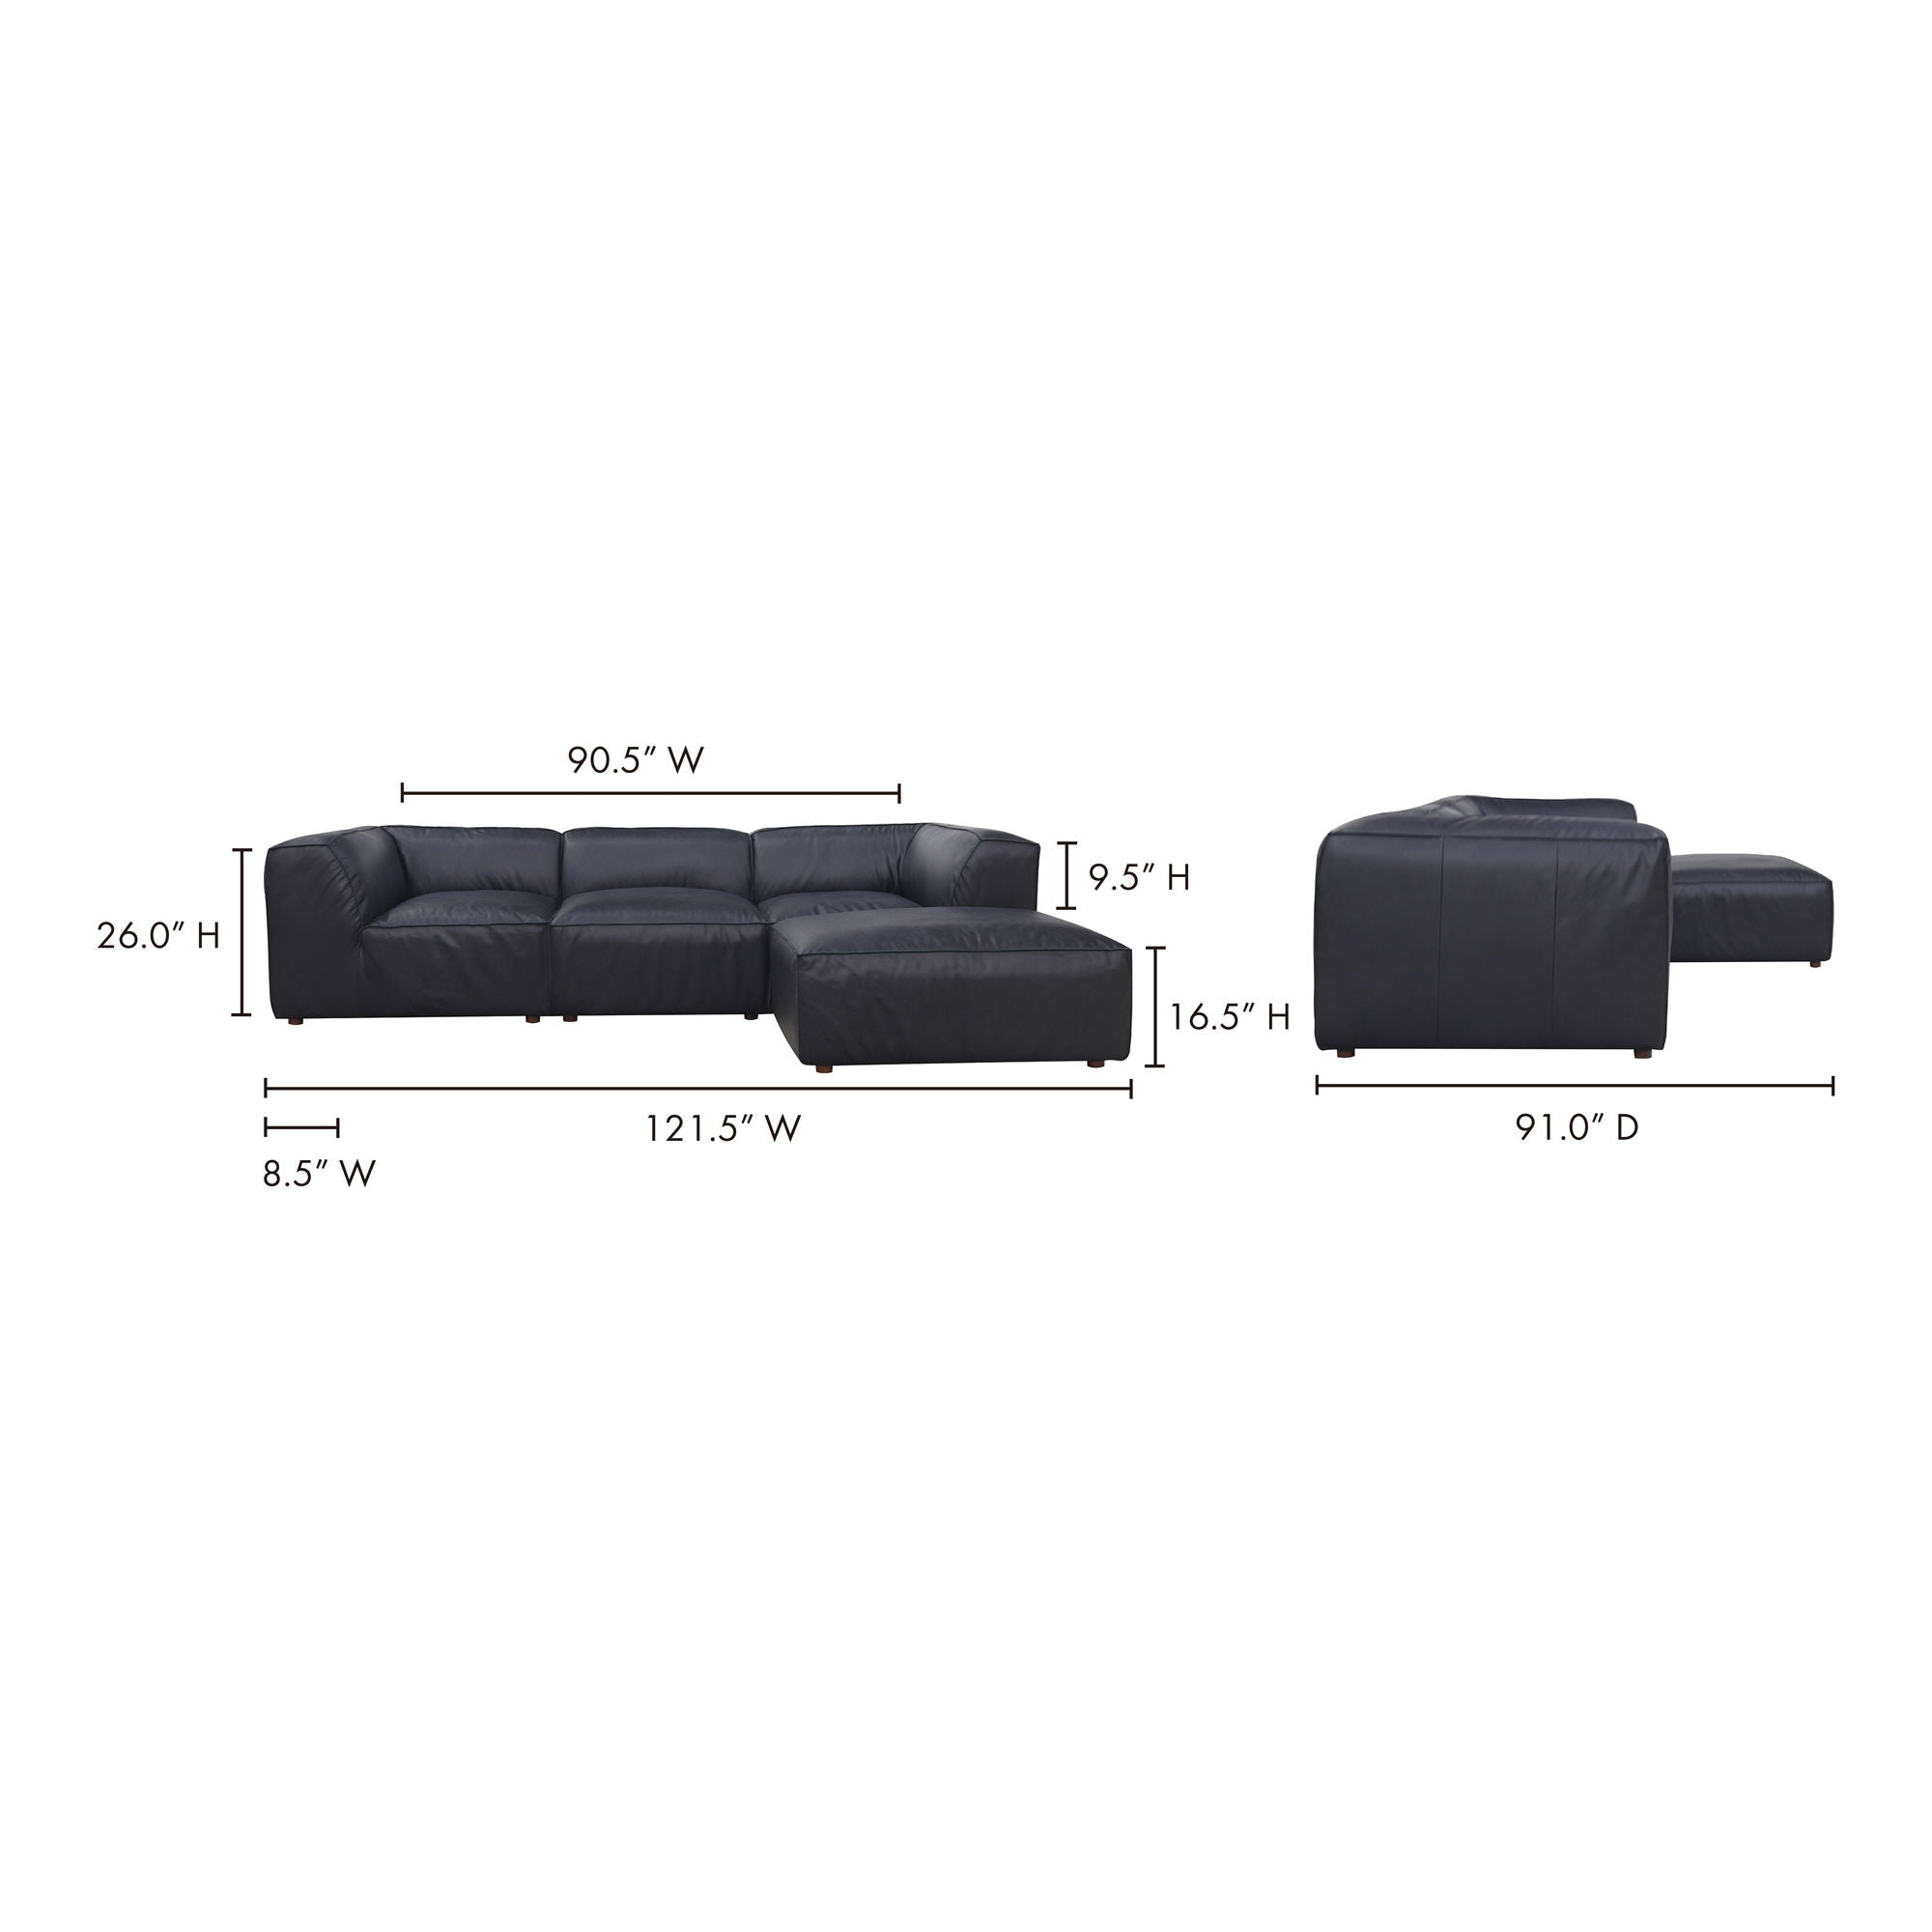 Black Leather Sectional - Modular, Cozy Form